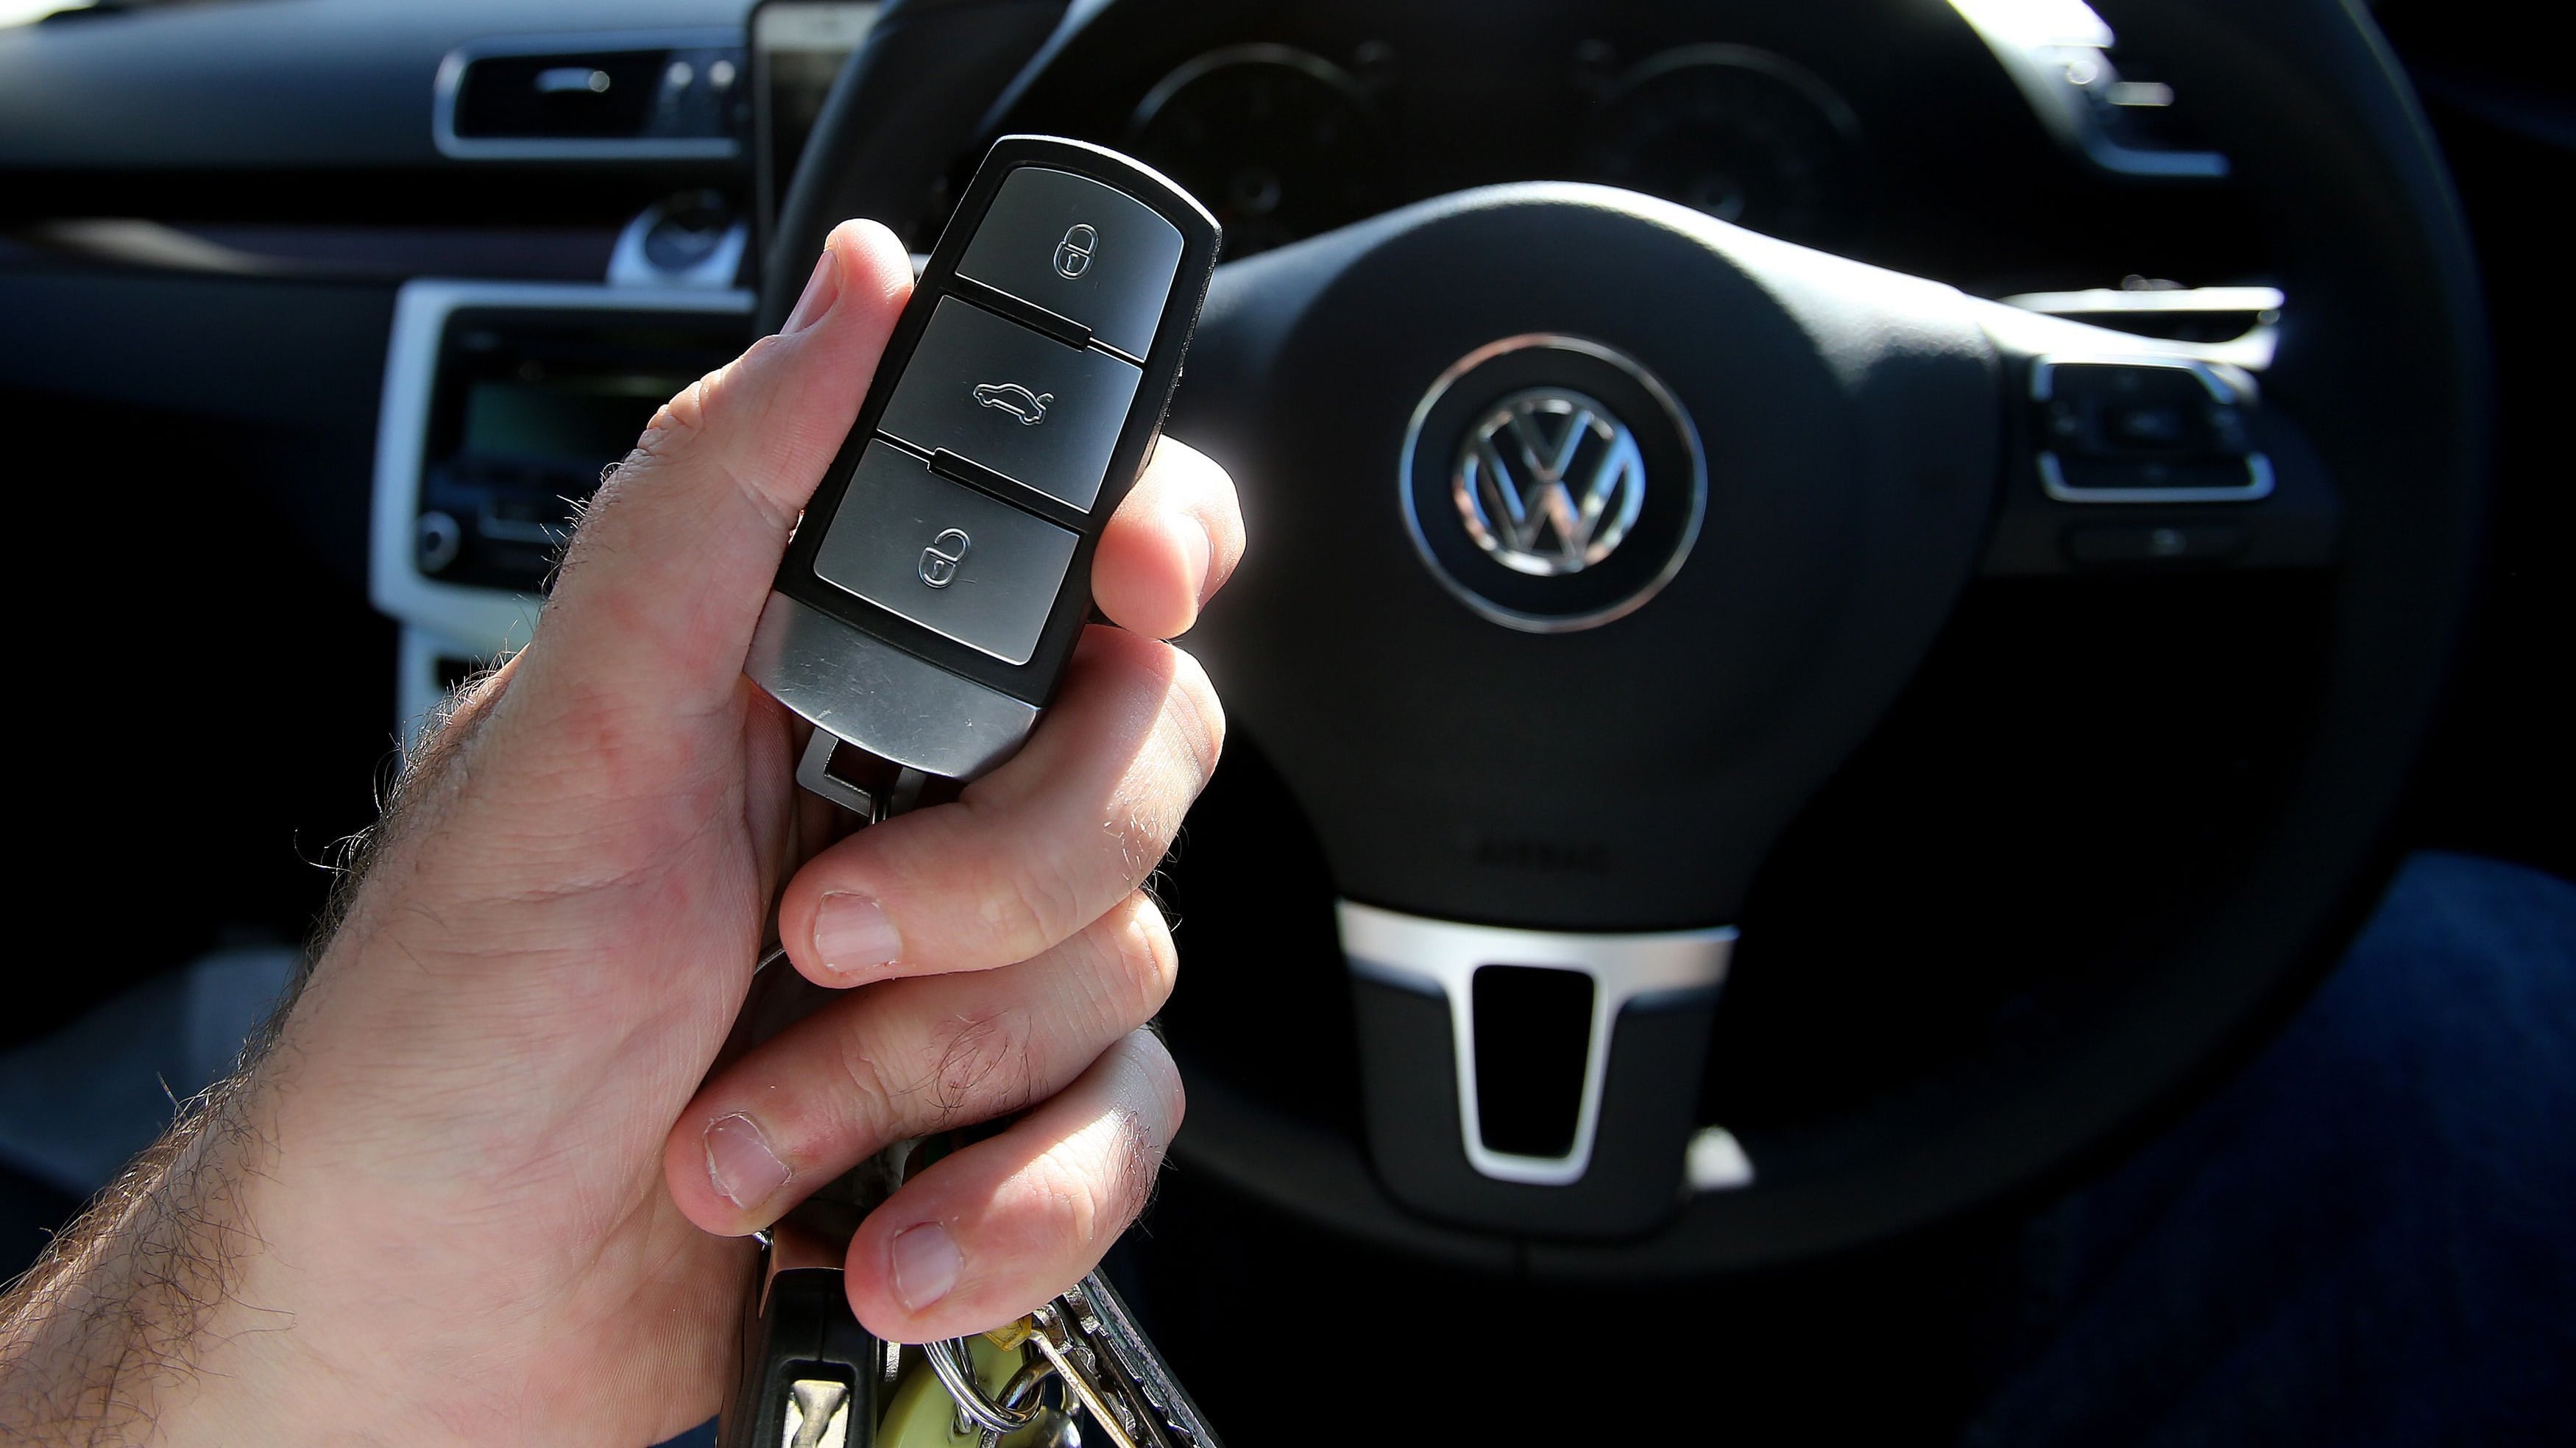 Keyless entry is making cars more vulnerable to thieves.